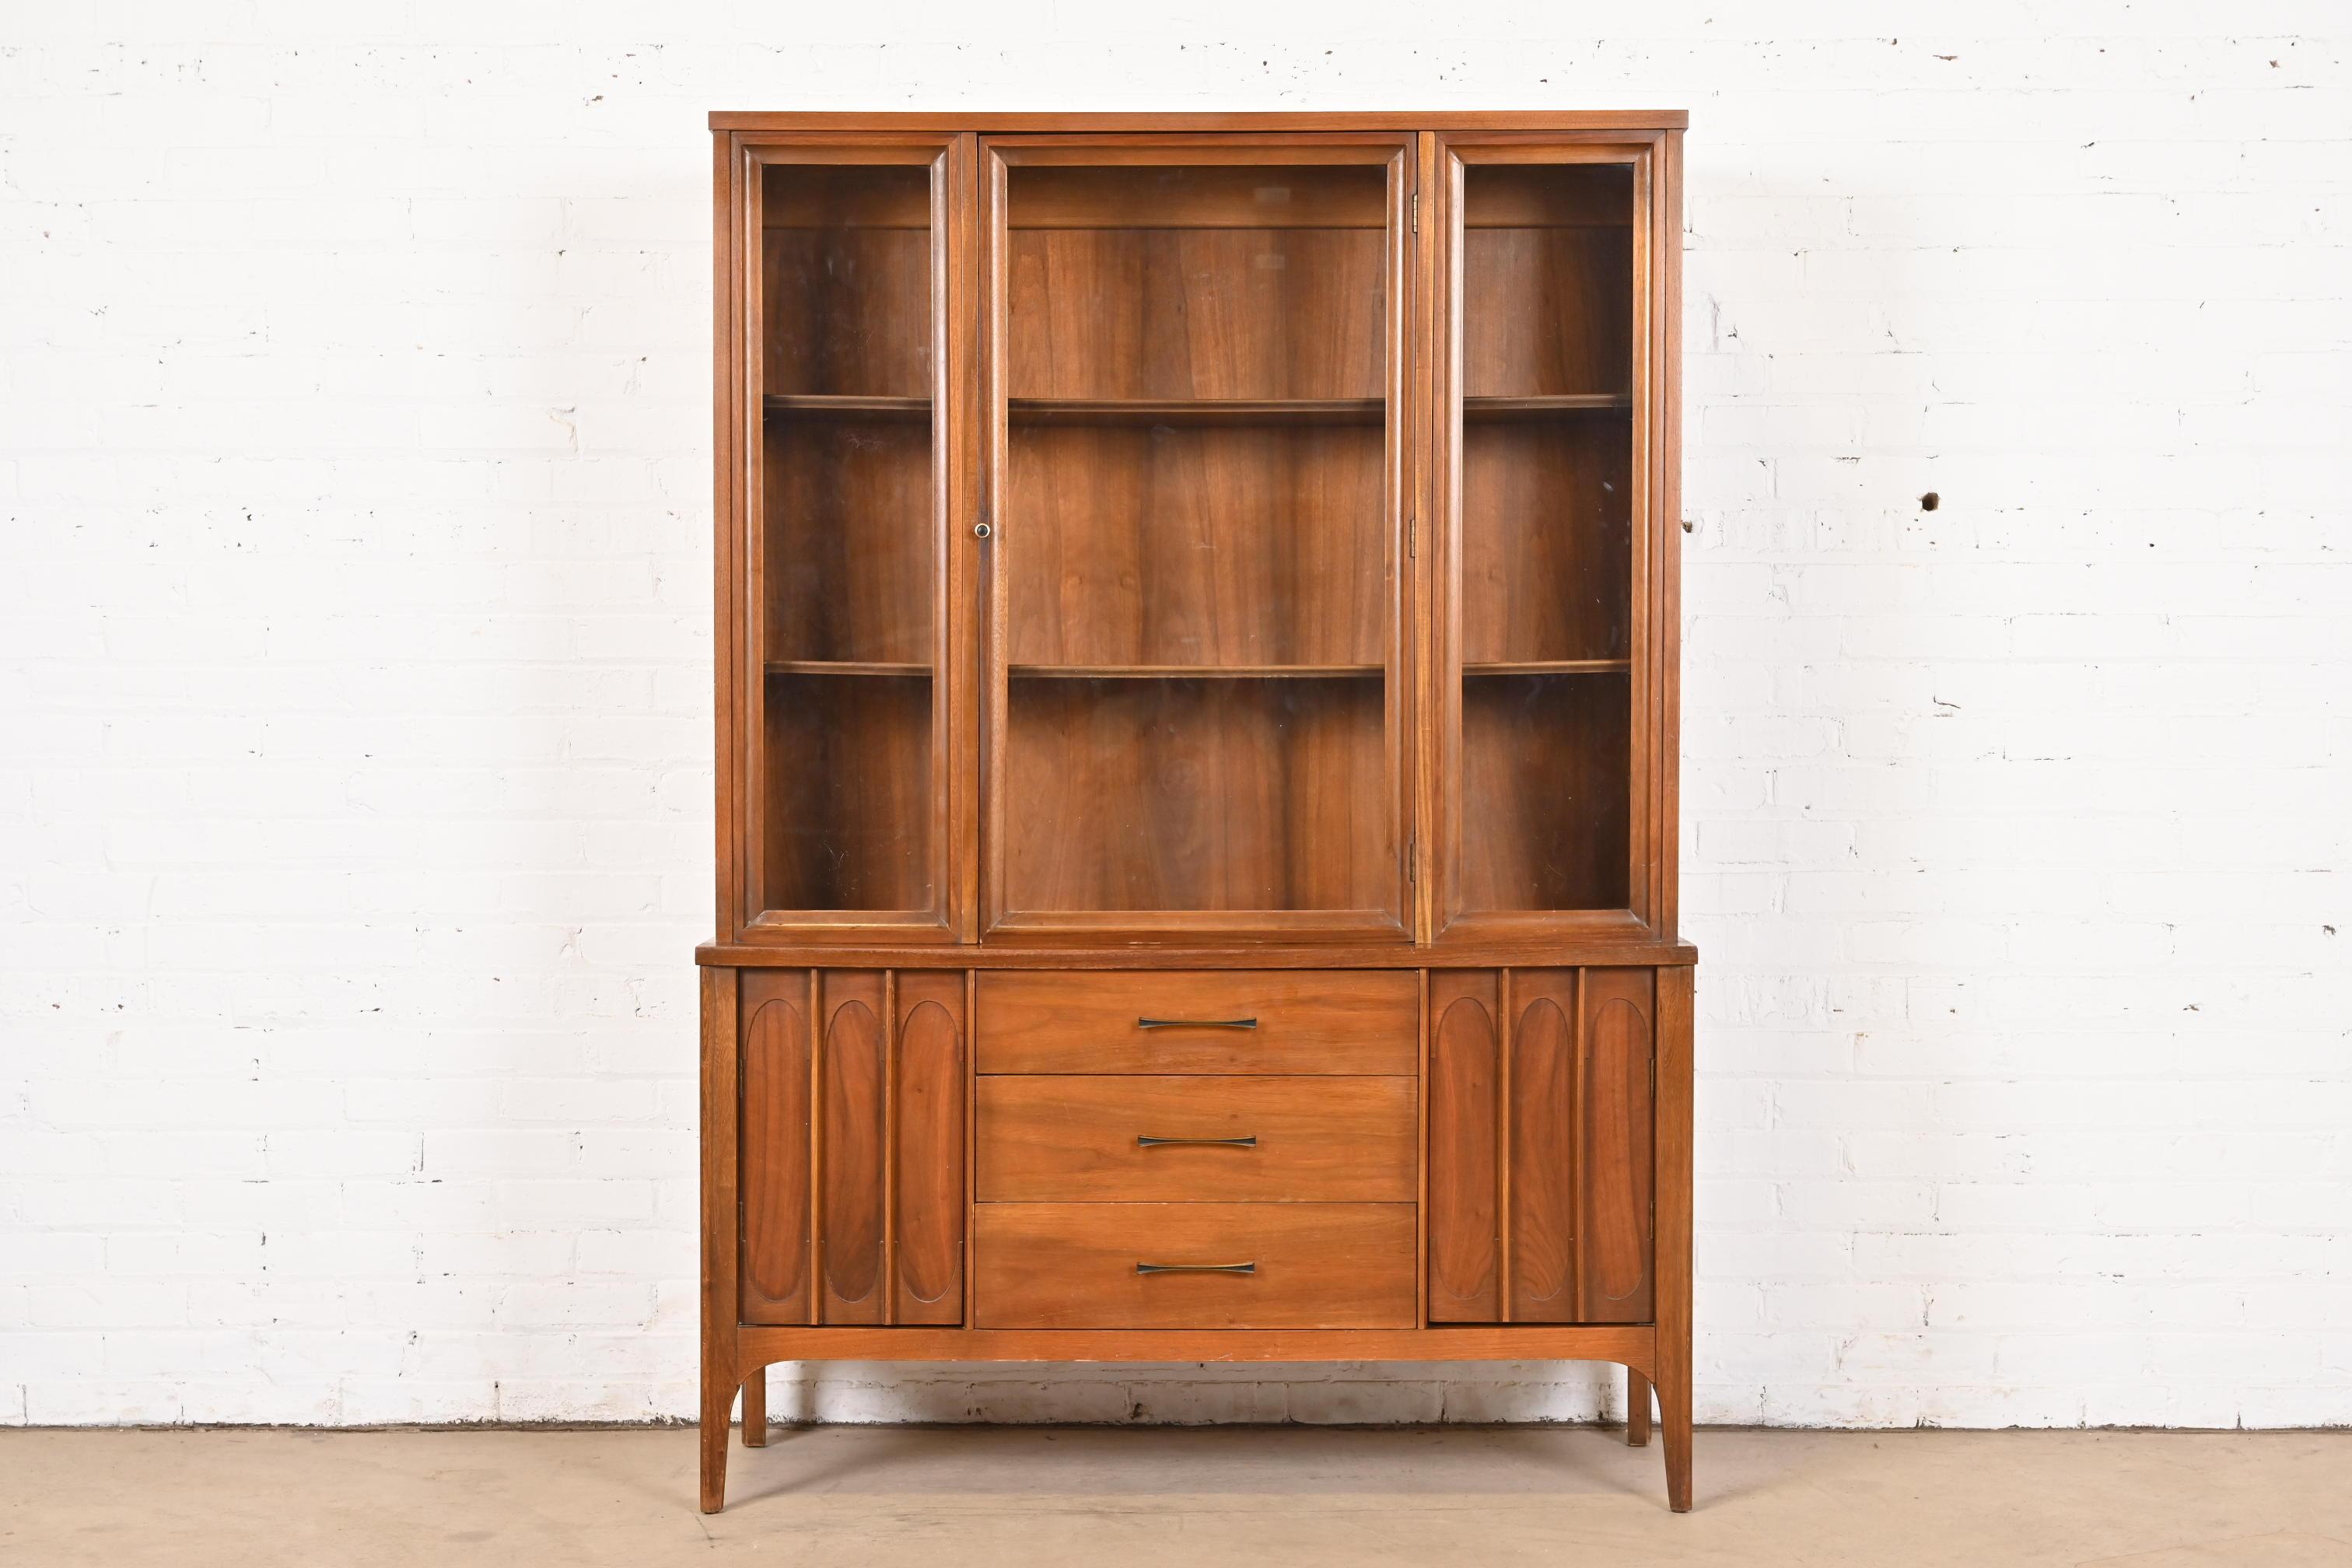 A beautiful Mid-Century Modern breakfront bookcase cabinet or dining cabinet

In the style of Broyhill Brasilia

USA, Circa 1960s

Sculpted walnut, with glass front doors and original hardware.

Measures: 47.25